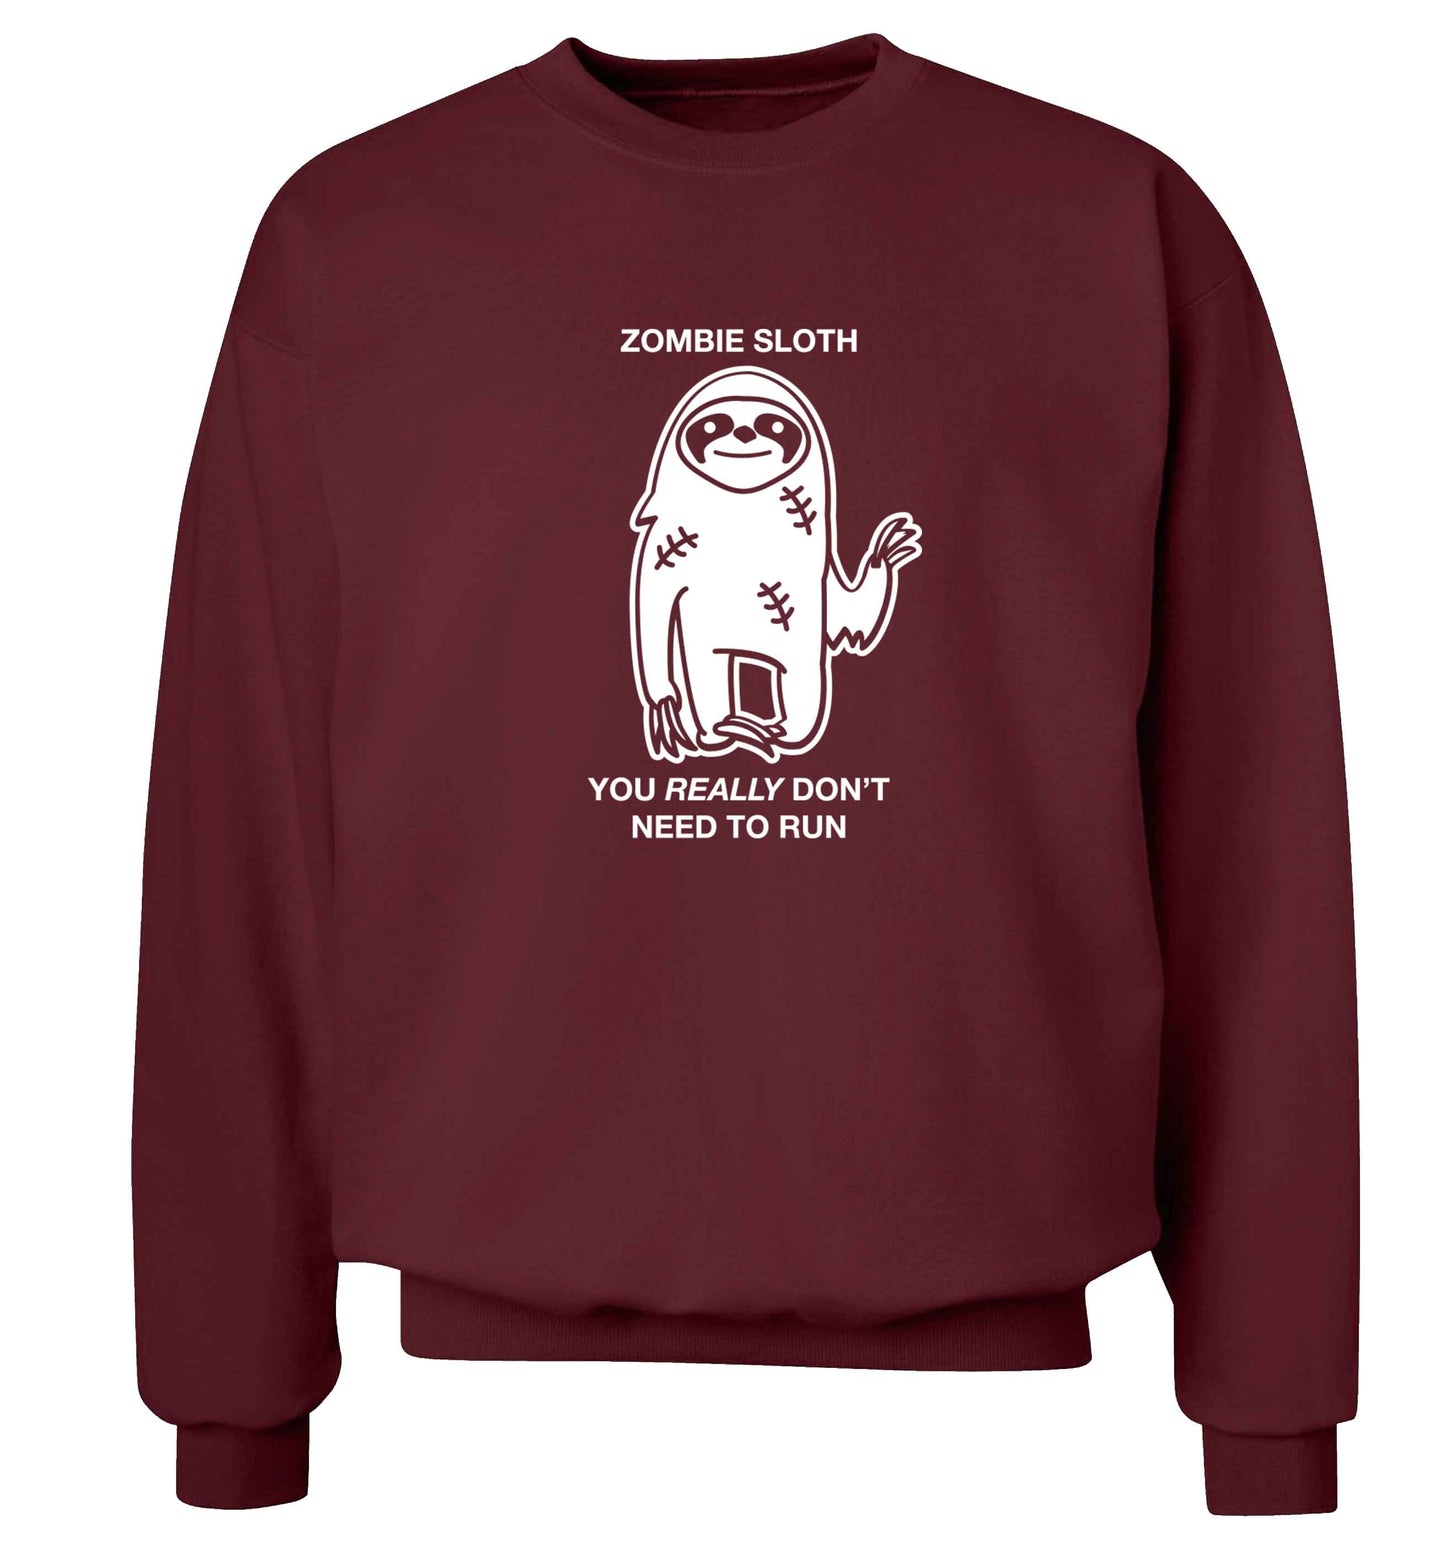 Zombie sloth you really don't need to run adult's unisex maroon sweater 2XL